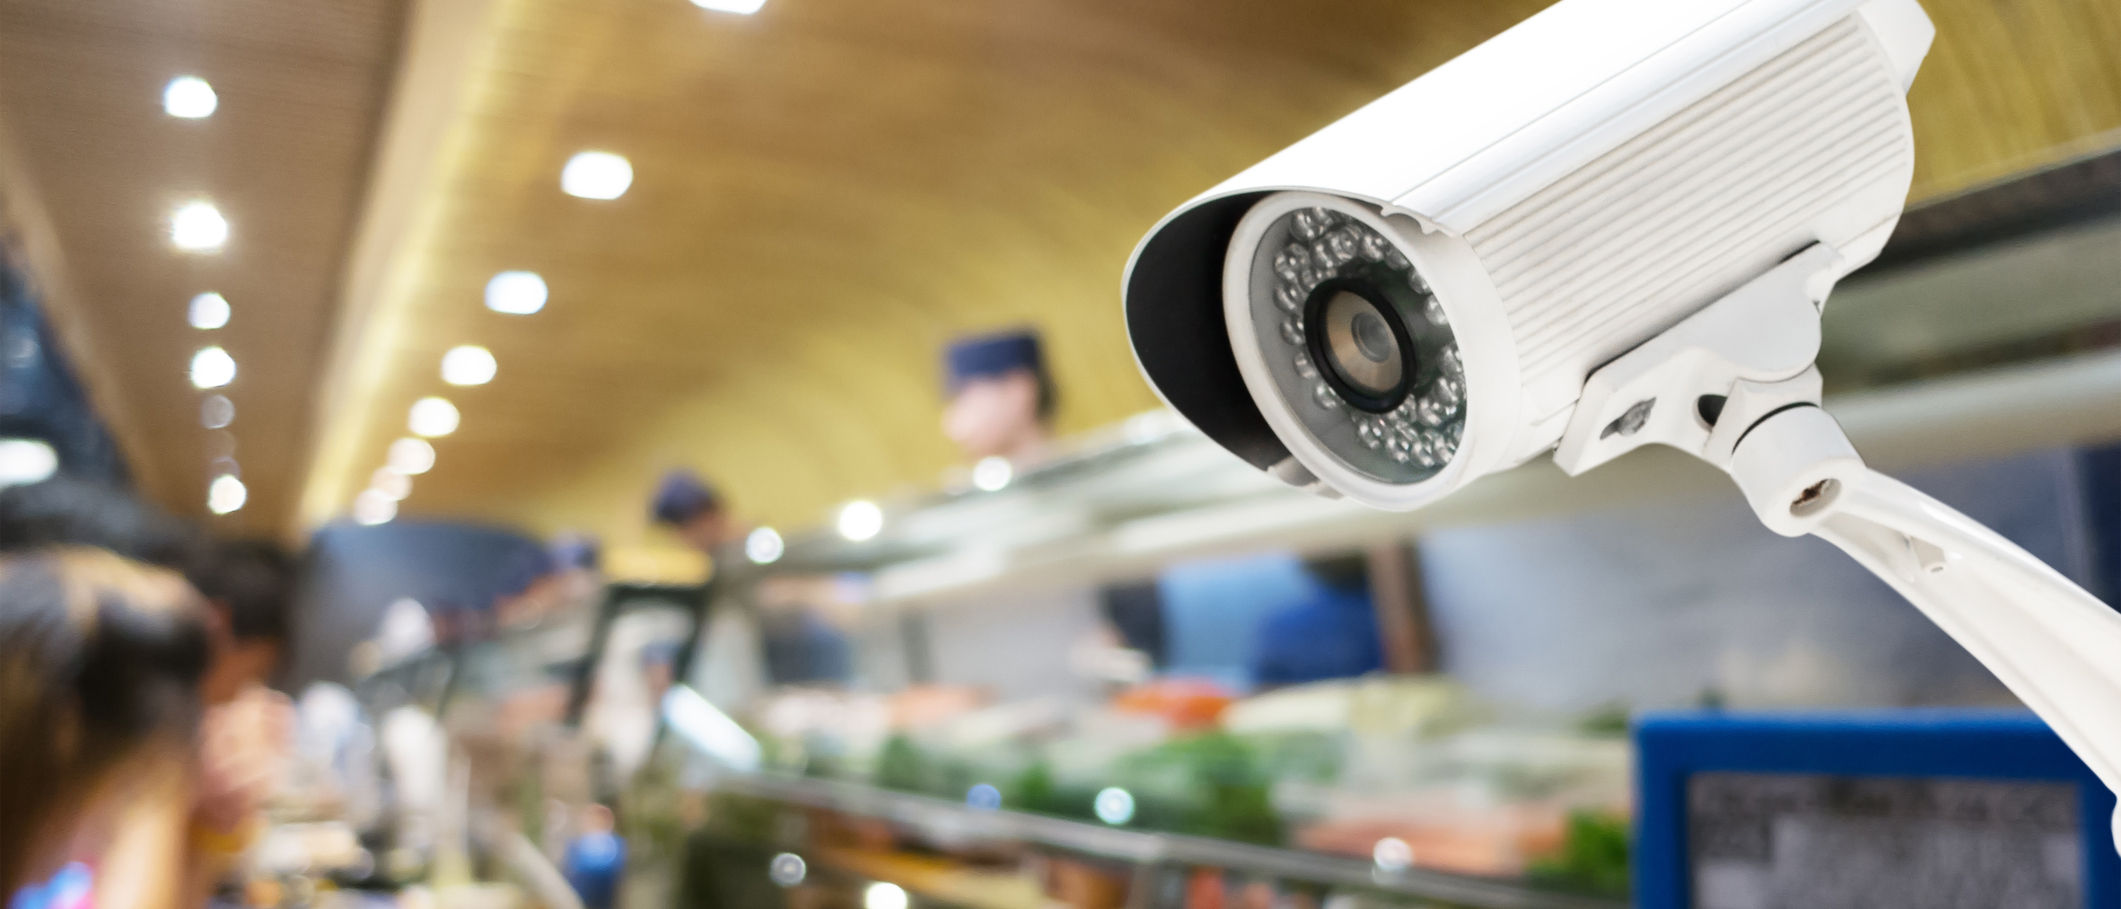 An alarm system with a CCTV surveilling the premises of a restaurant